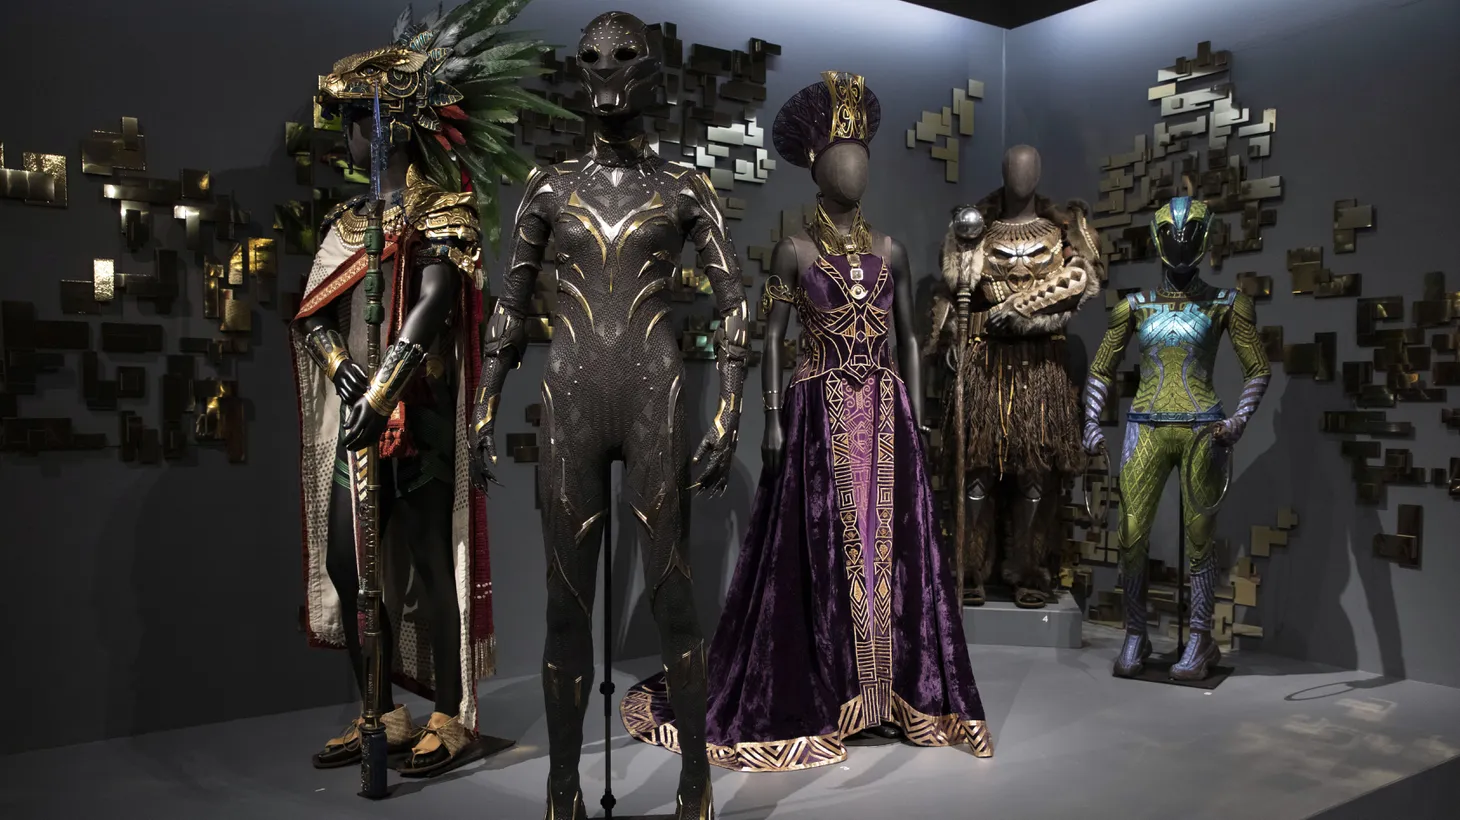 These Oscar-nominated costumes from “Black Panther: Wakanda Forever” are on display at the “Art of Costume Design in Film” exhibit at the FIDM Museum.